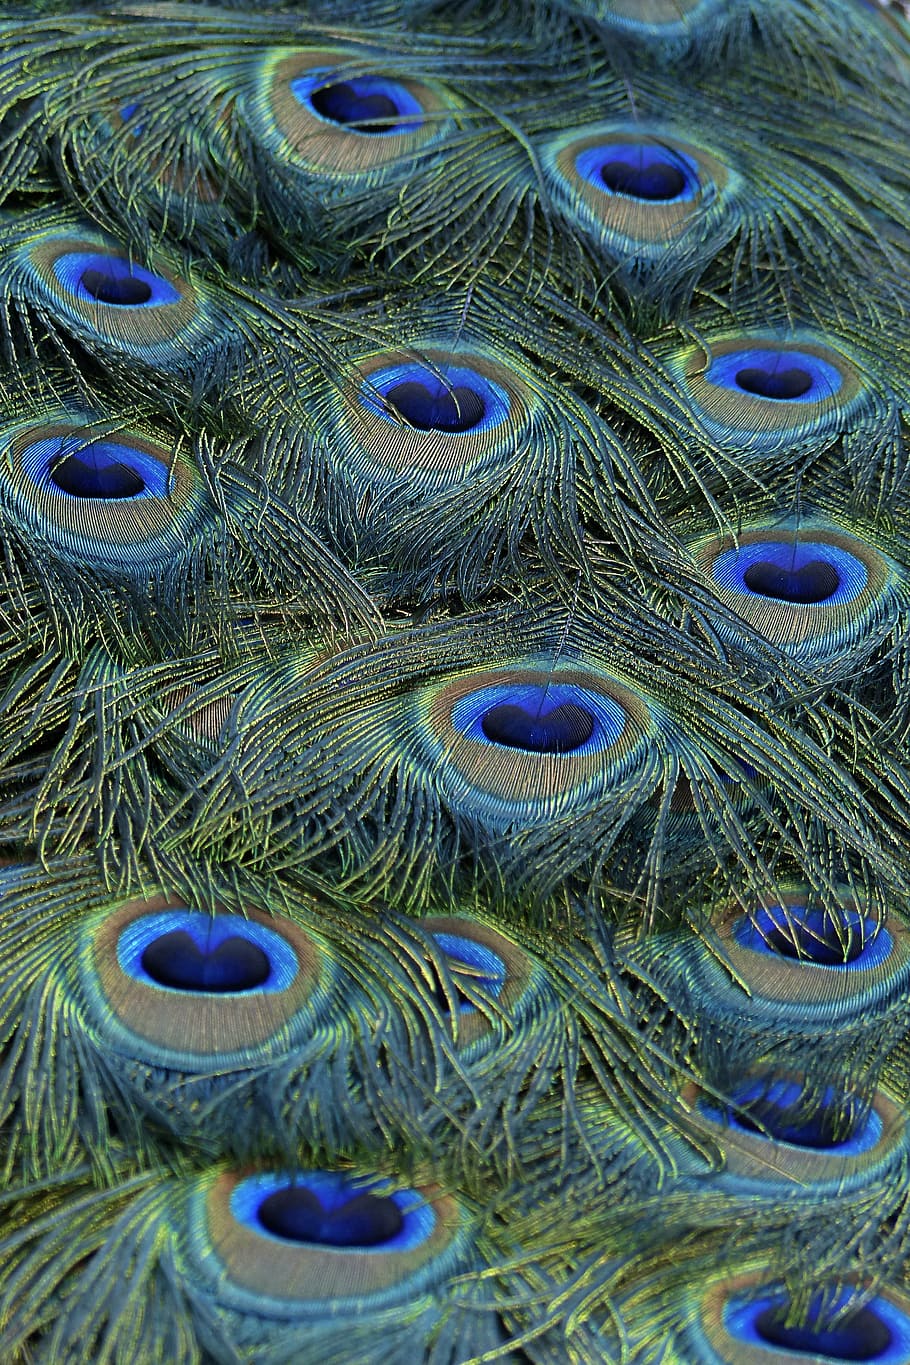 peacock feather, peacock, feathers, blue, bird, nature, colorful, pattern, animal, wildlife